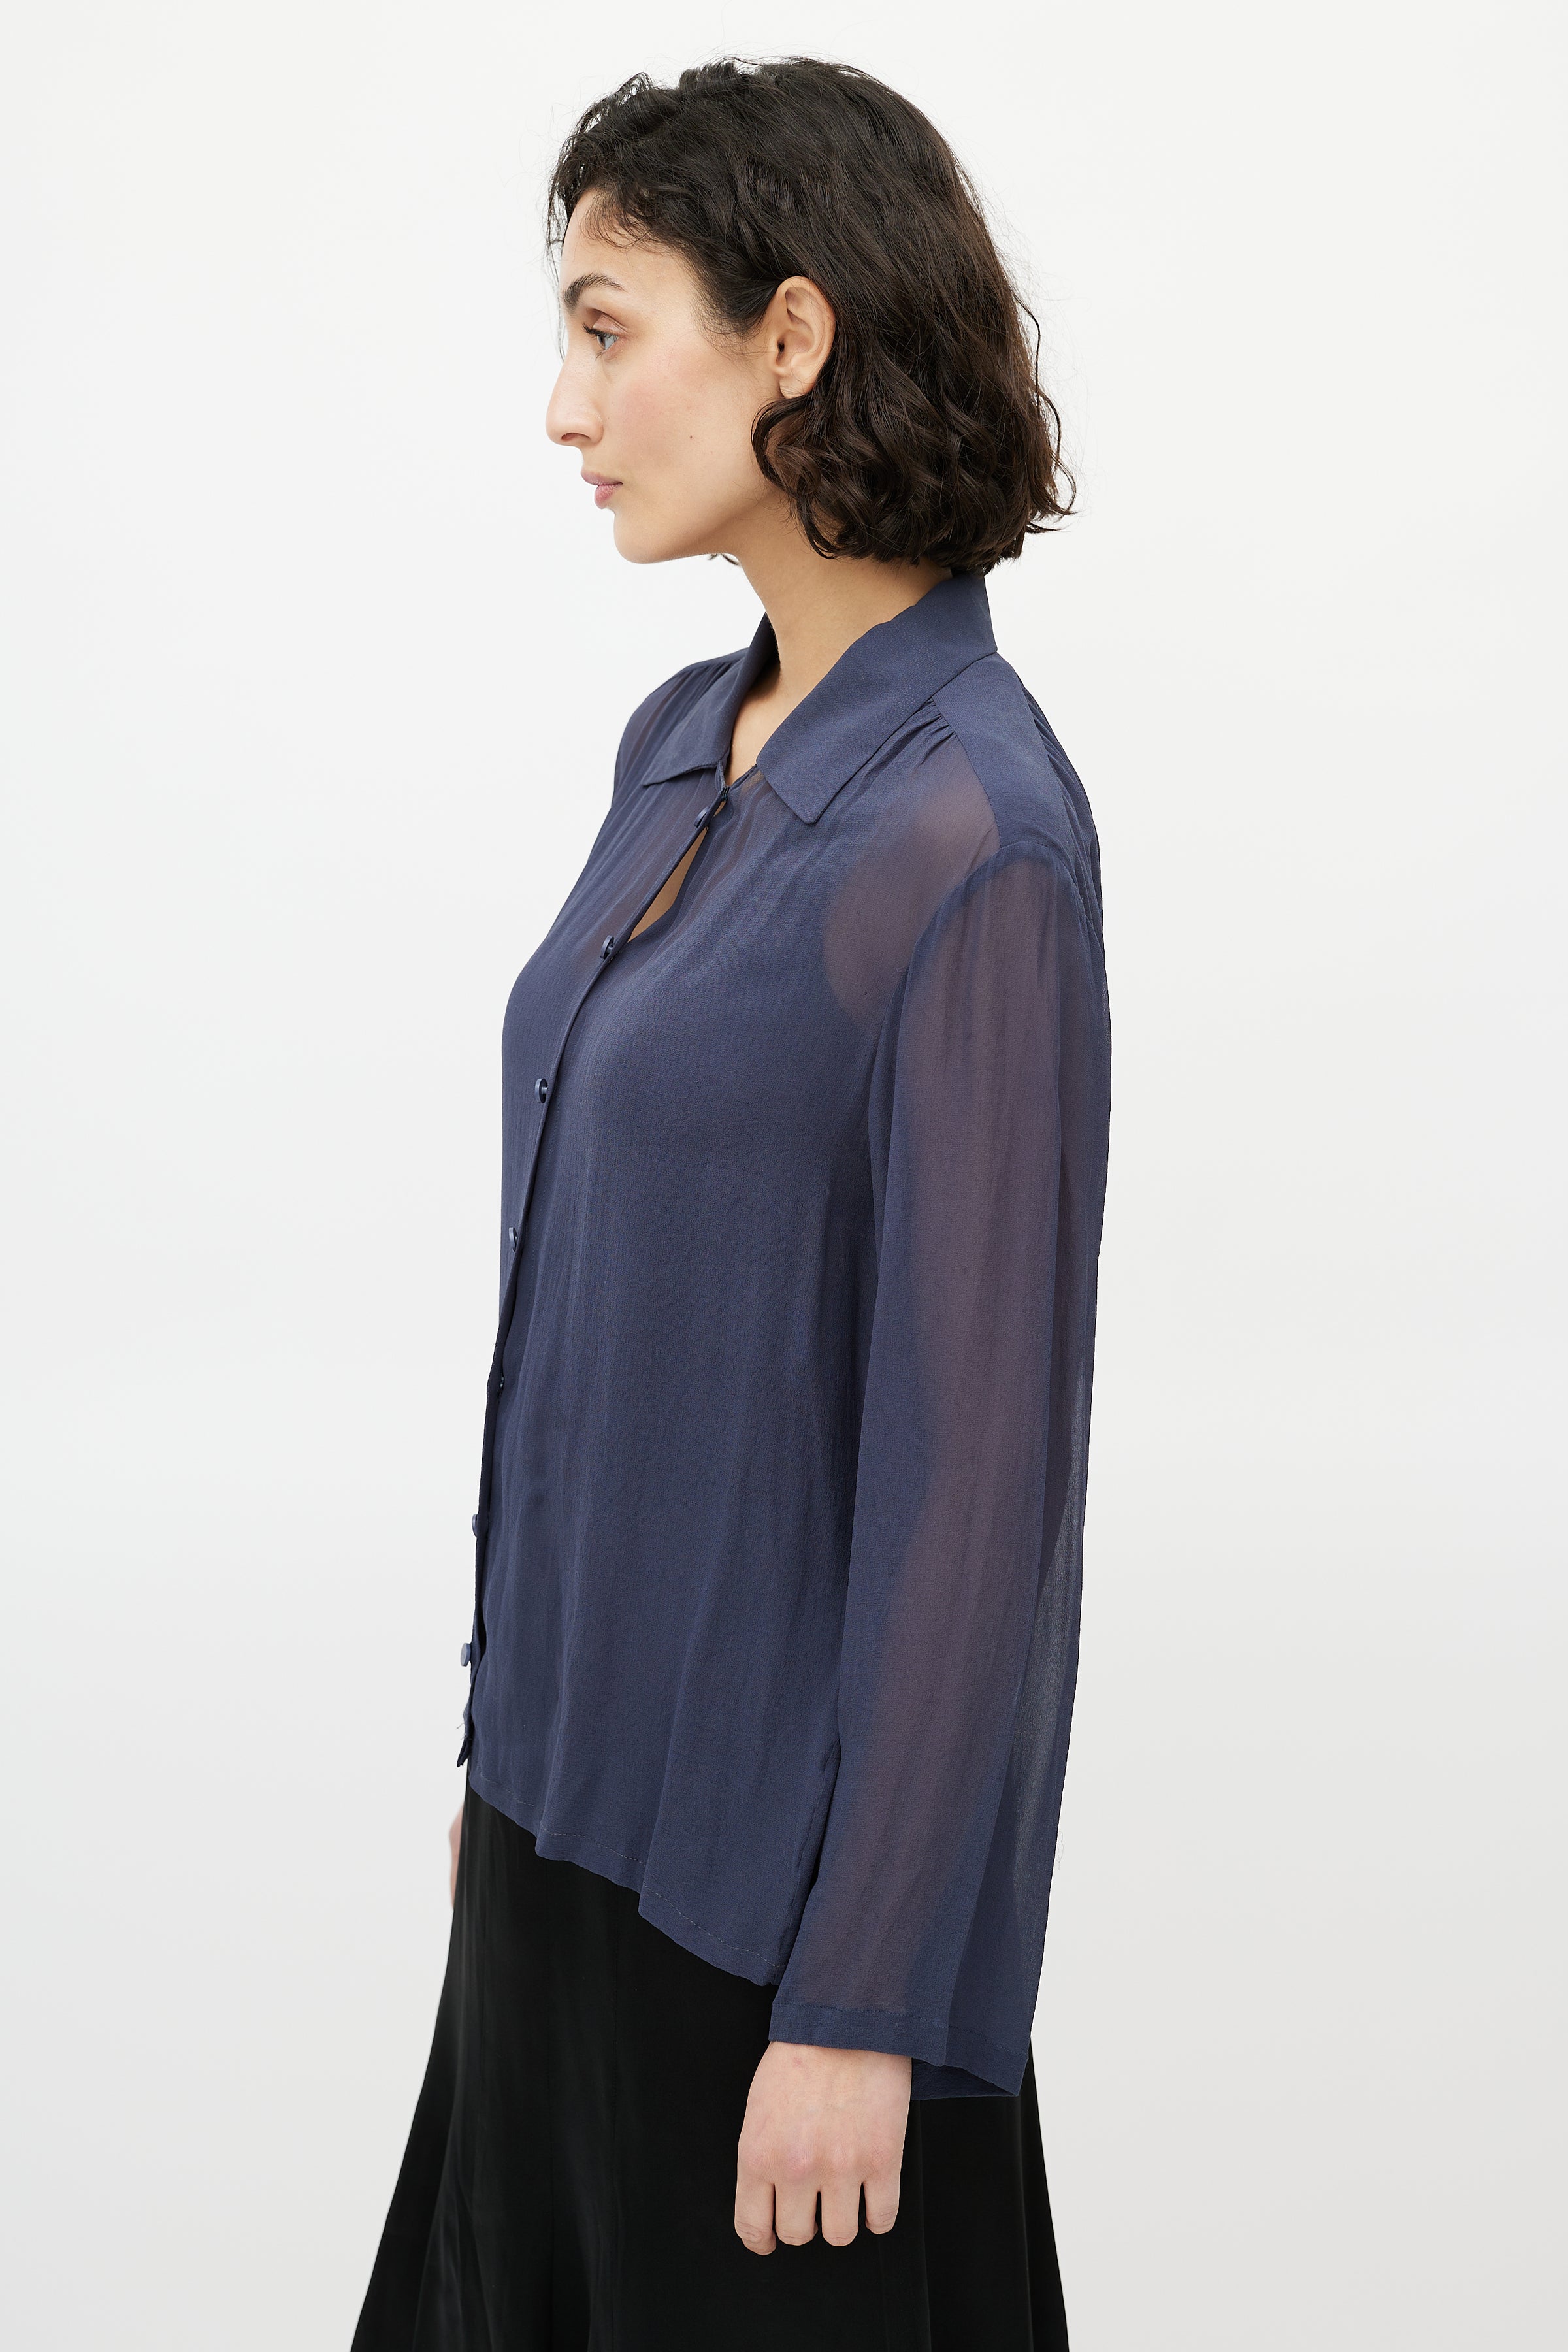 Chanel // Navy Sheer – VSP Scarf Blouse Consignment